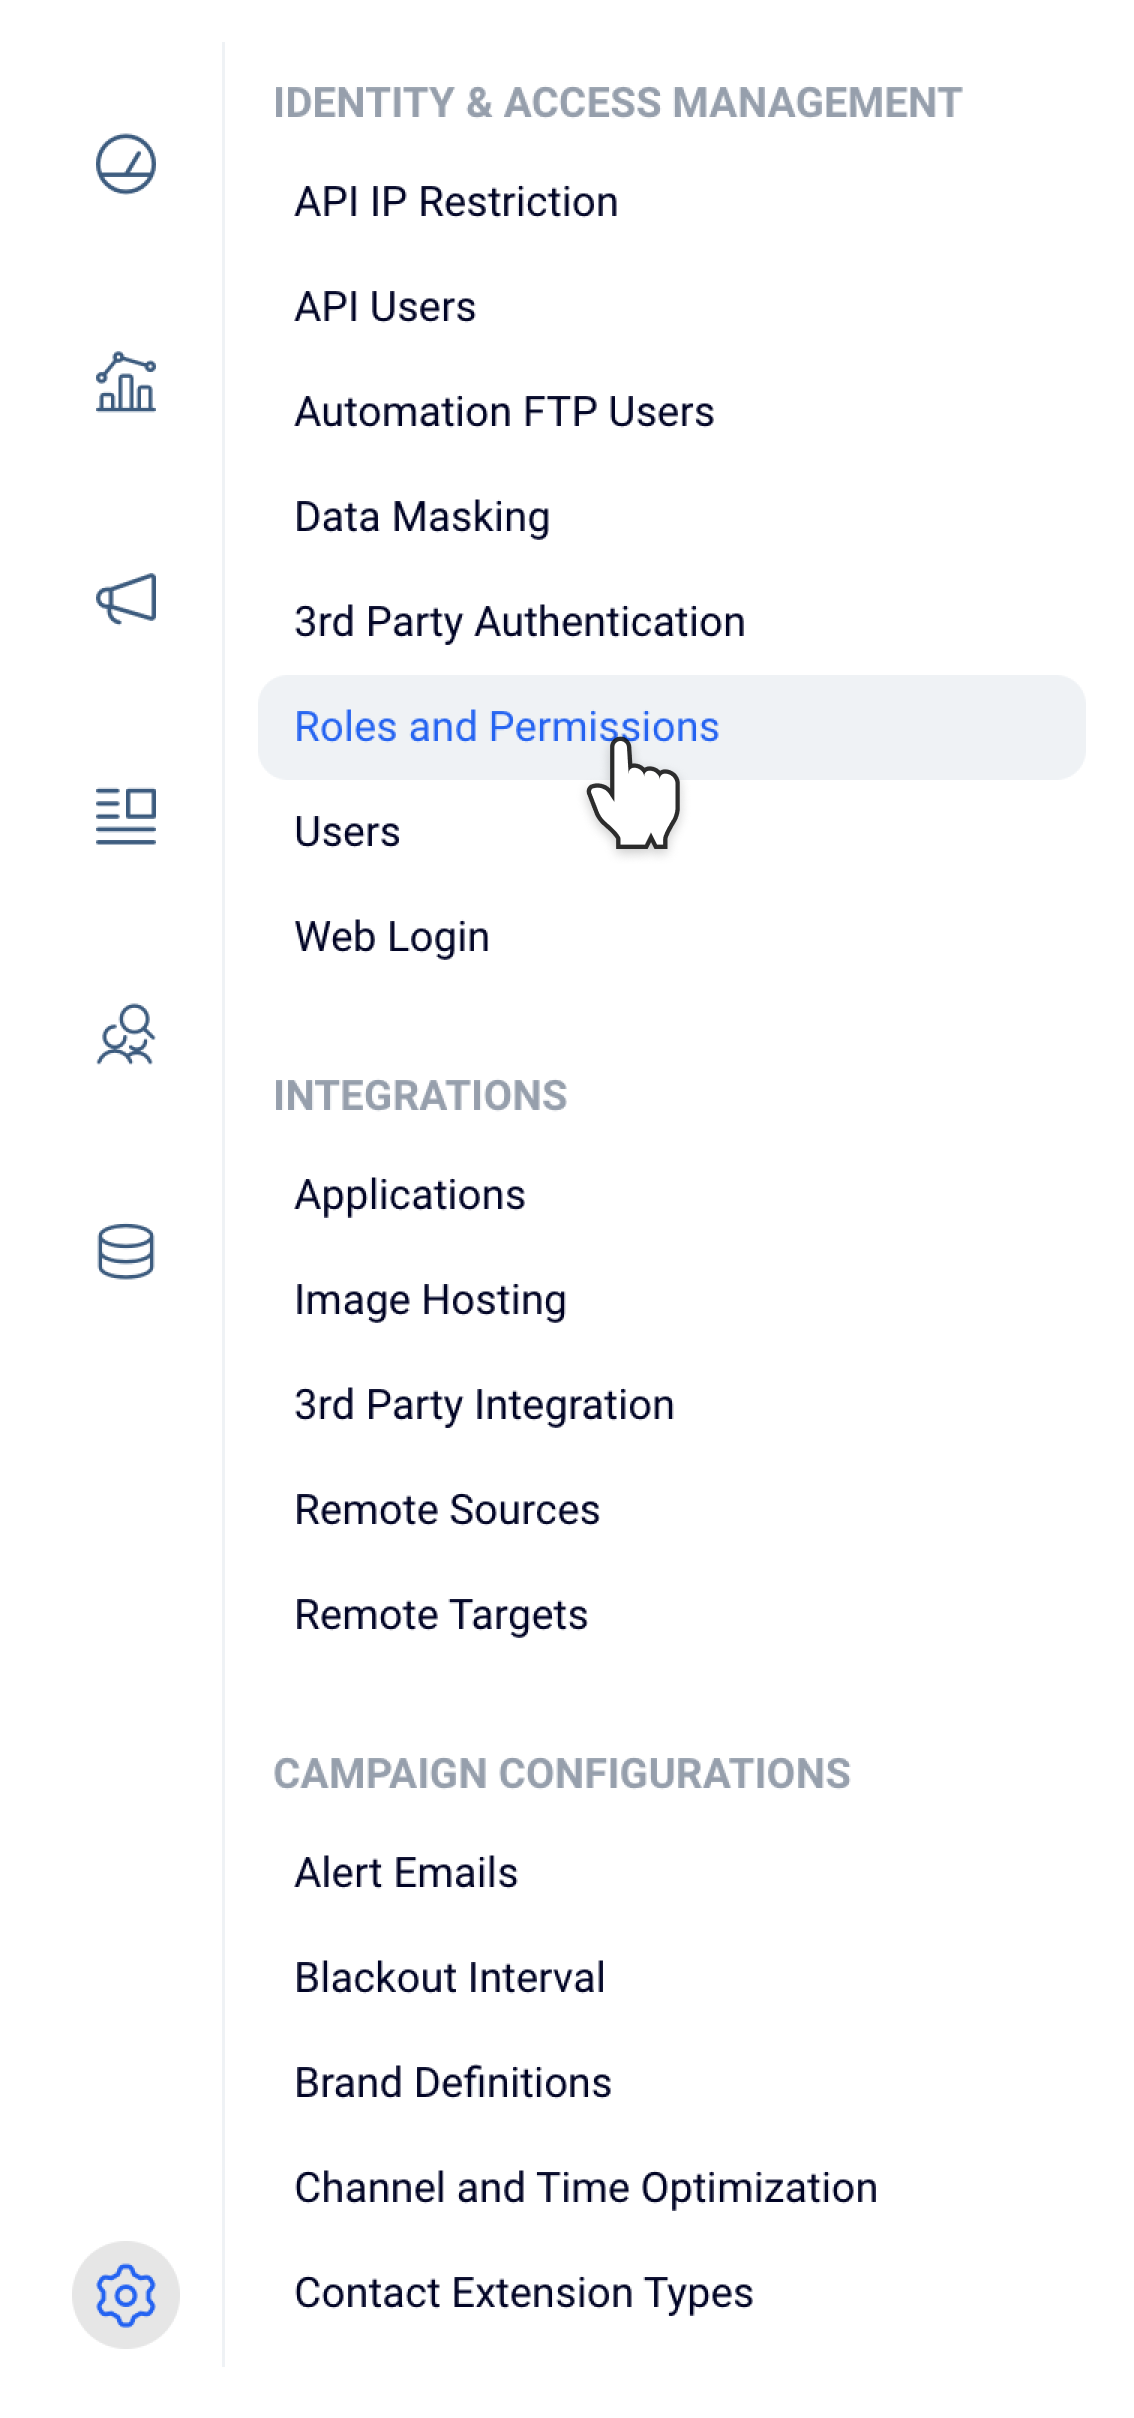 Settings > Identity & Access Management > Roles And Permissions